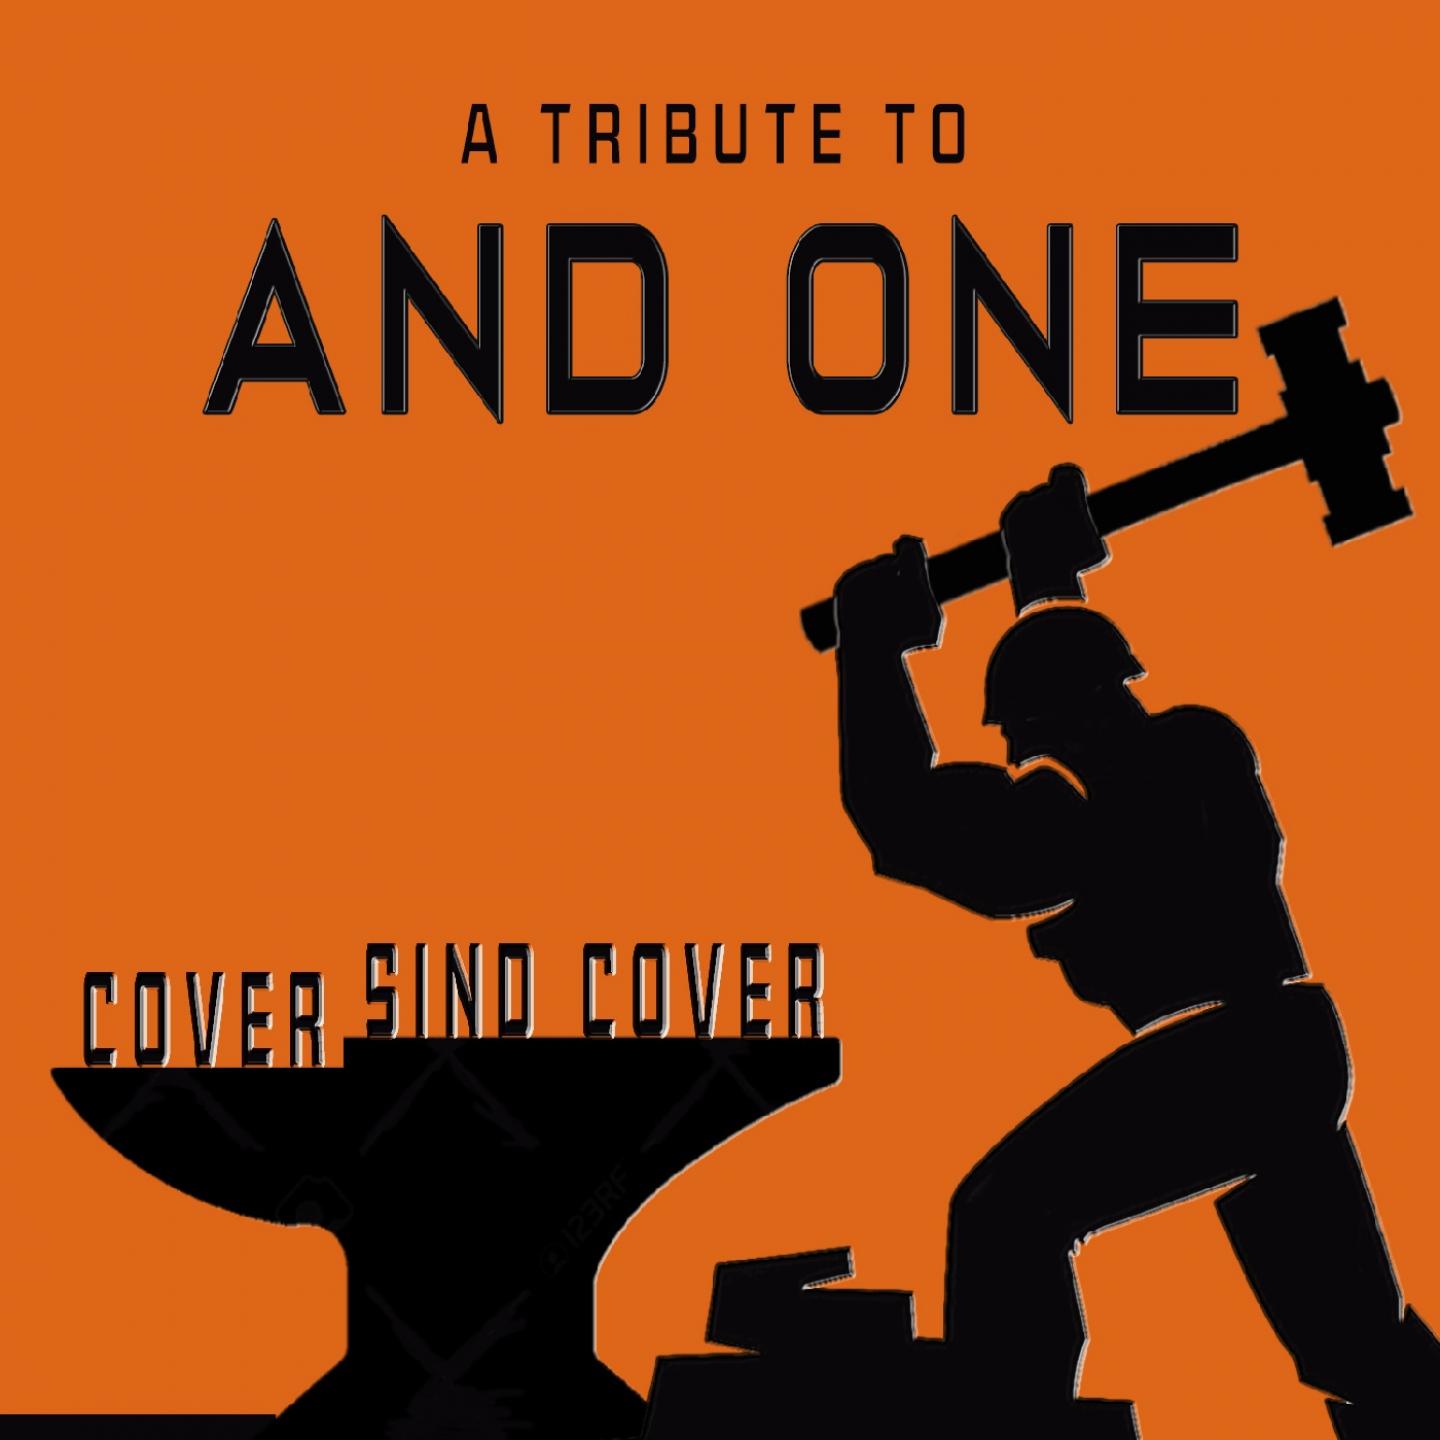 Cover Sind Cover (A Tribute to And One)